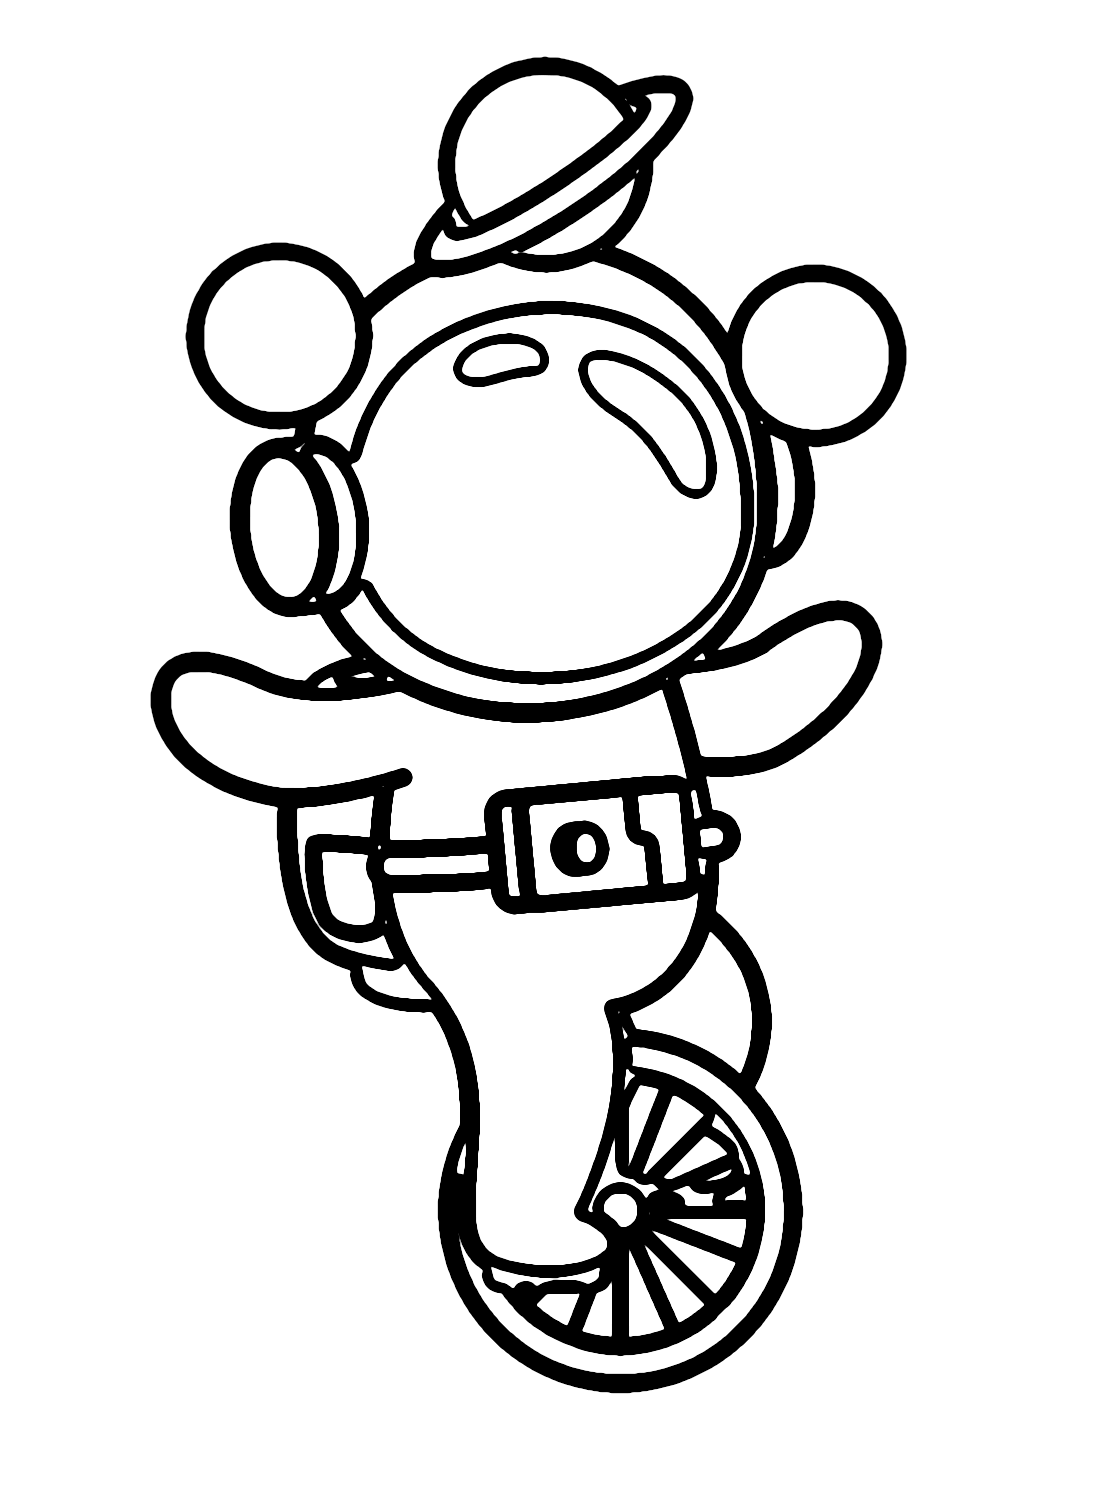 Astronaut with Unicycle and Planets Coloring Page